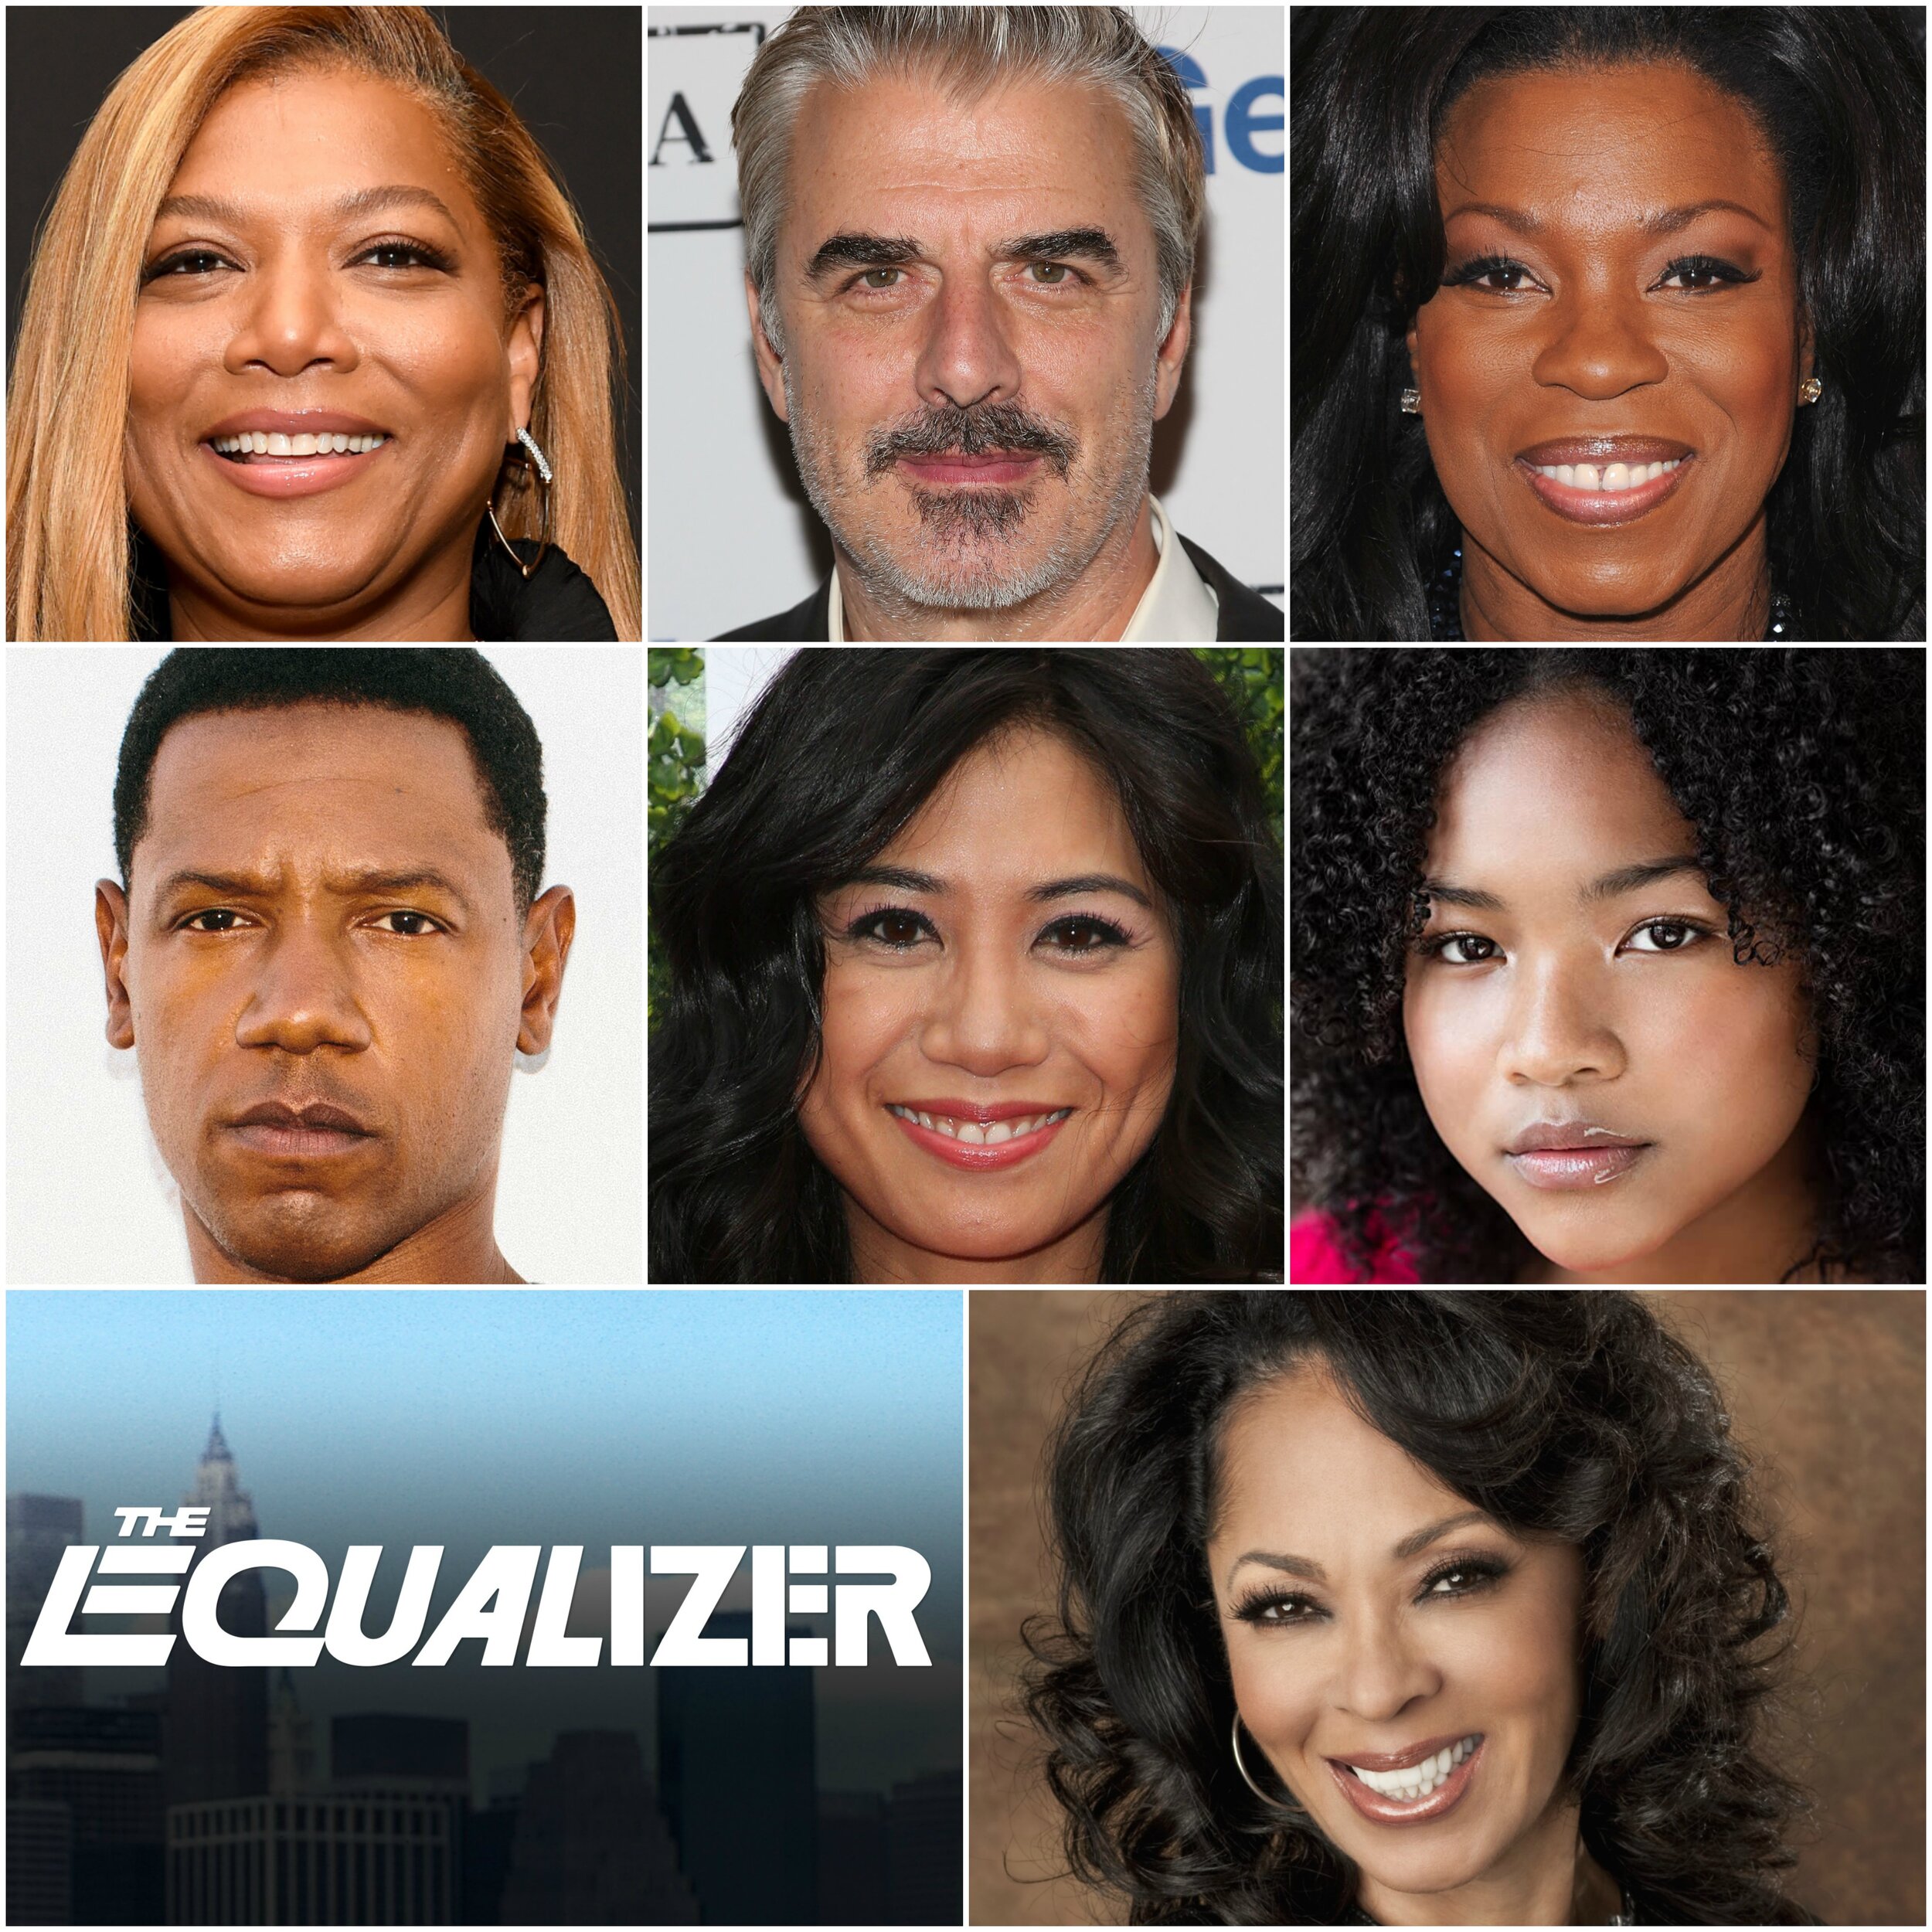 A Queen becomes The Equalizer: What it means when Black women